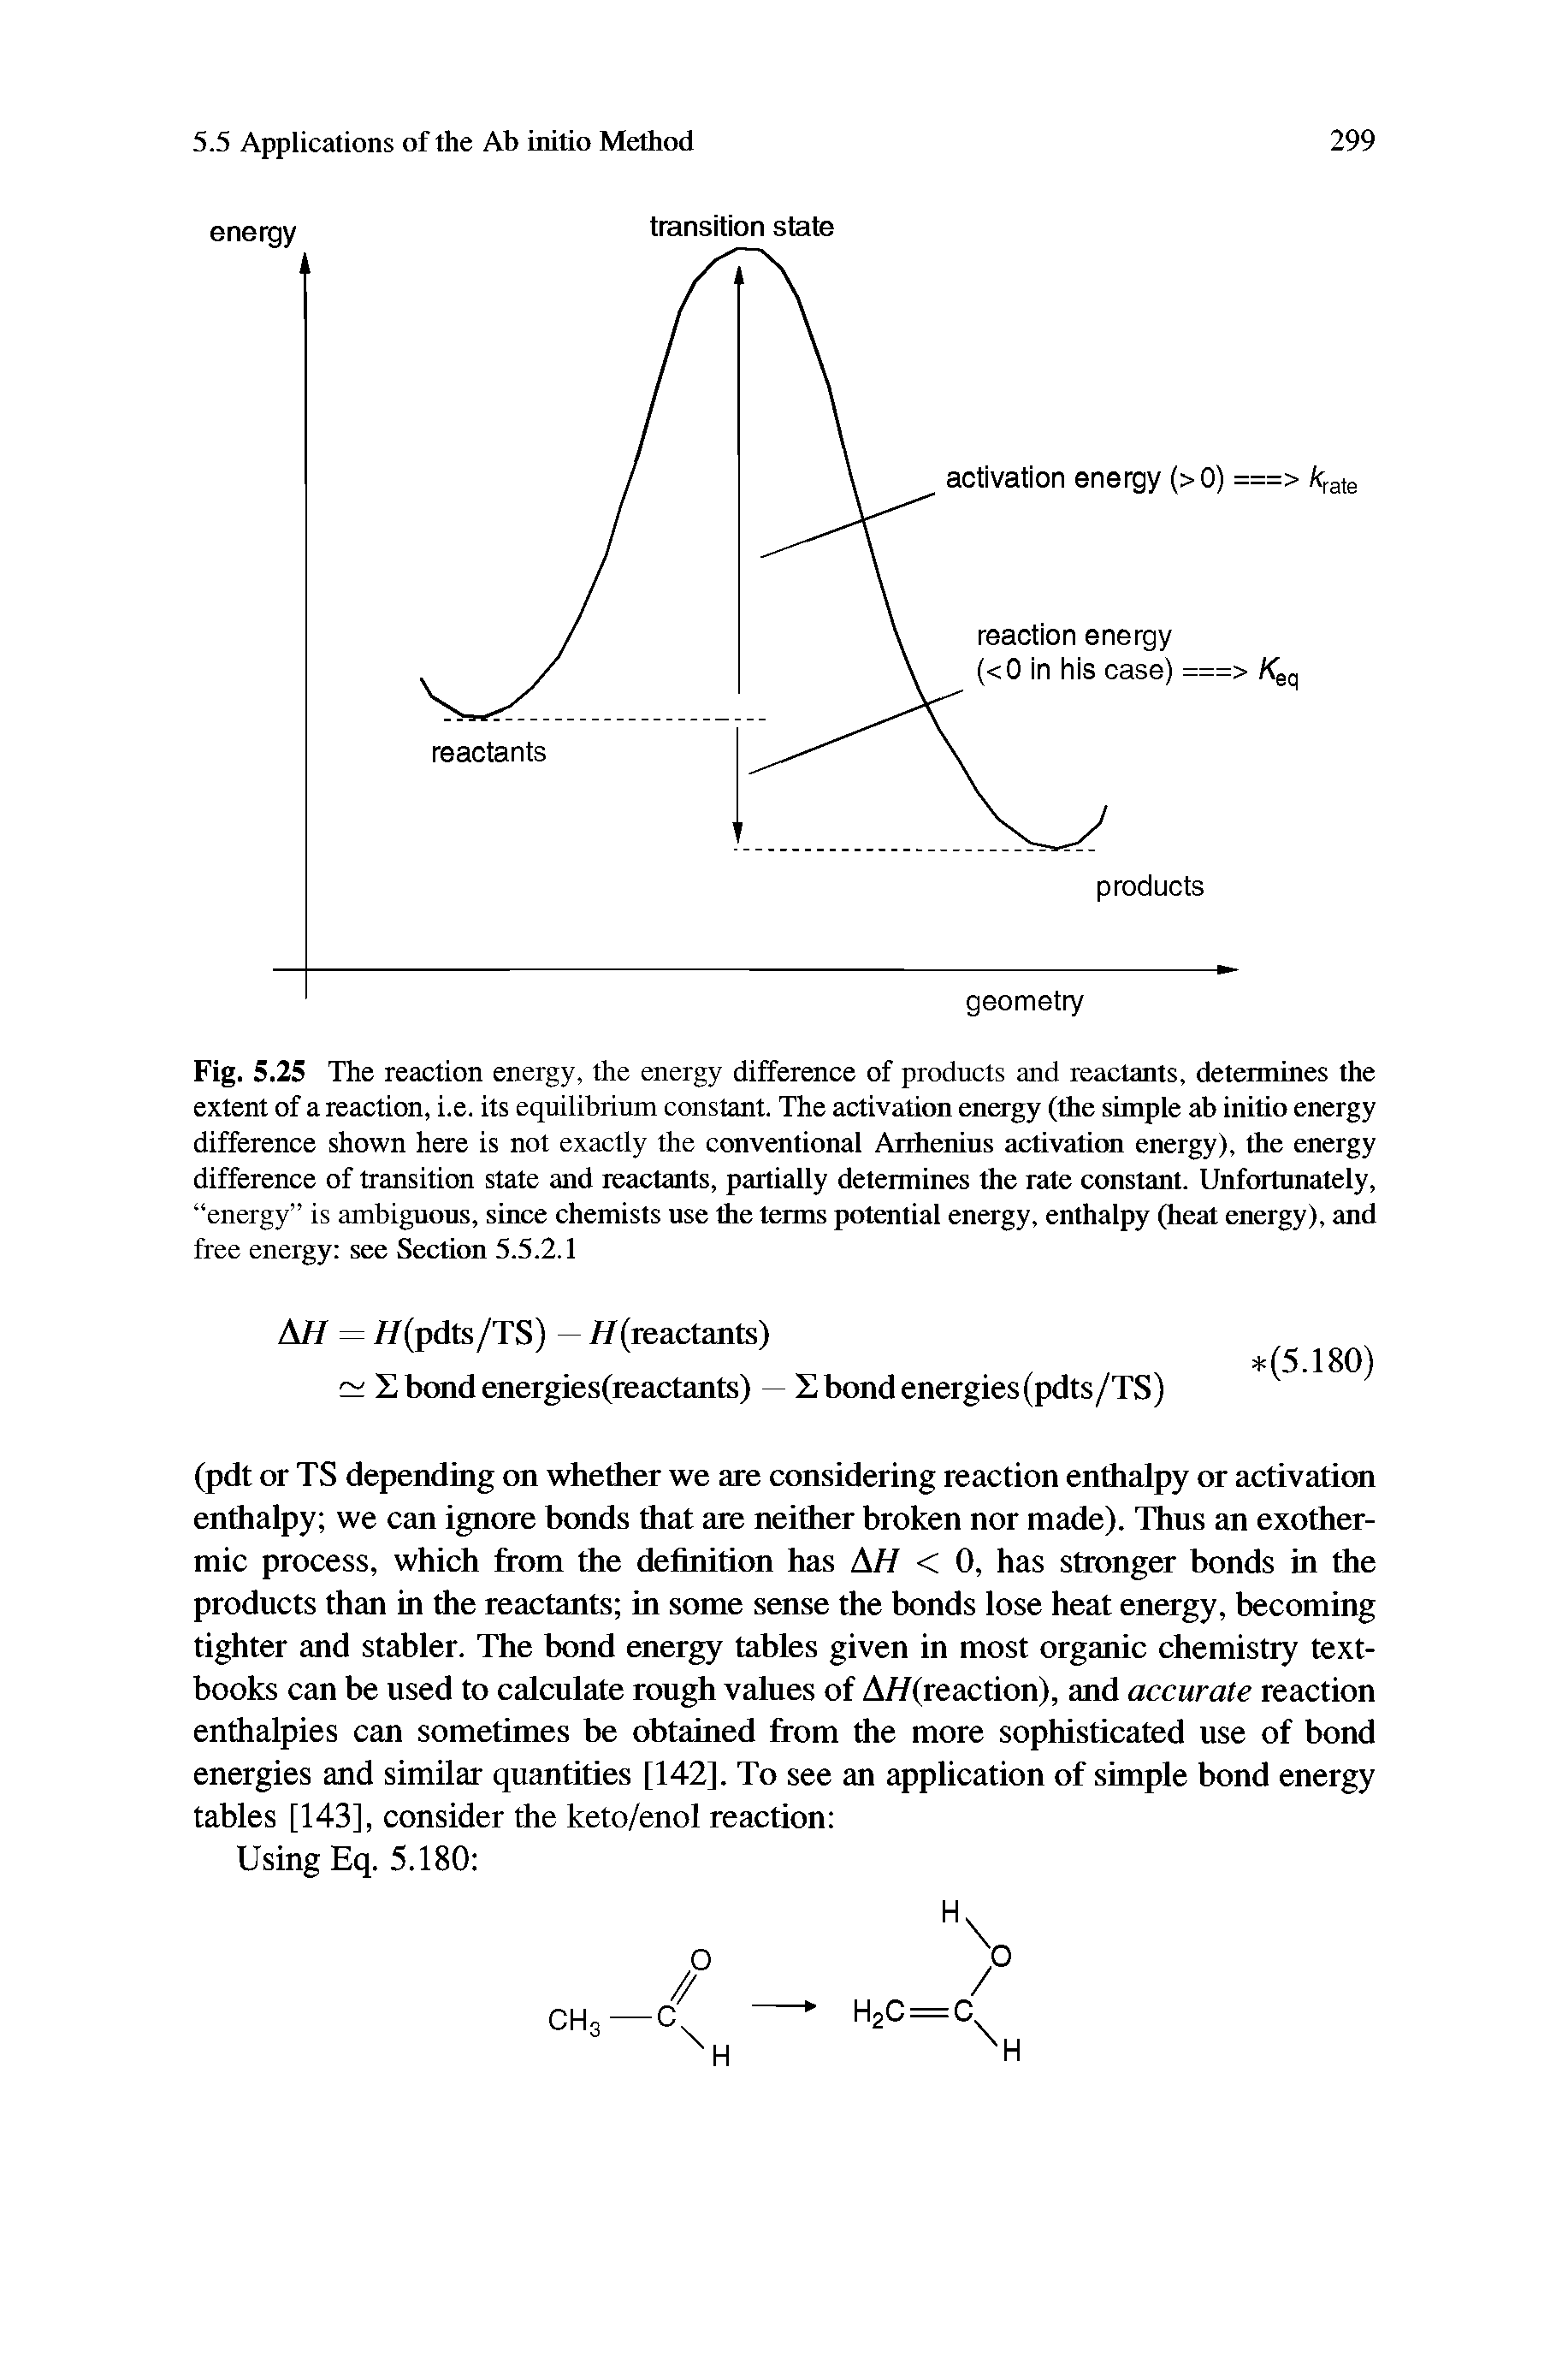 Fig. 5.25 The reaction energy, the energy difference of products and reactants, determines the extent of a reaction, i.e. its equilibrium constant. The activation energy (the simple ab initio energy difference shown here is not exactly the conventional Arrhenius activation energy), the energy difference of transition state and reactants, partially determines the rate constant. Unfortunately, energy is ambiguous, since chemists use the terms potential energy, enthalpy (heat energy), and free energy see Section 5.5.2.1...